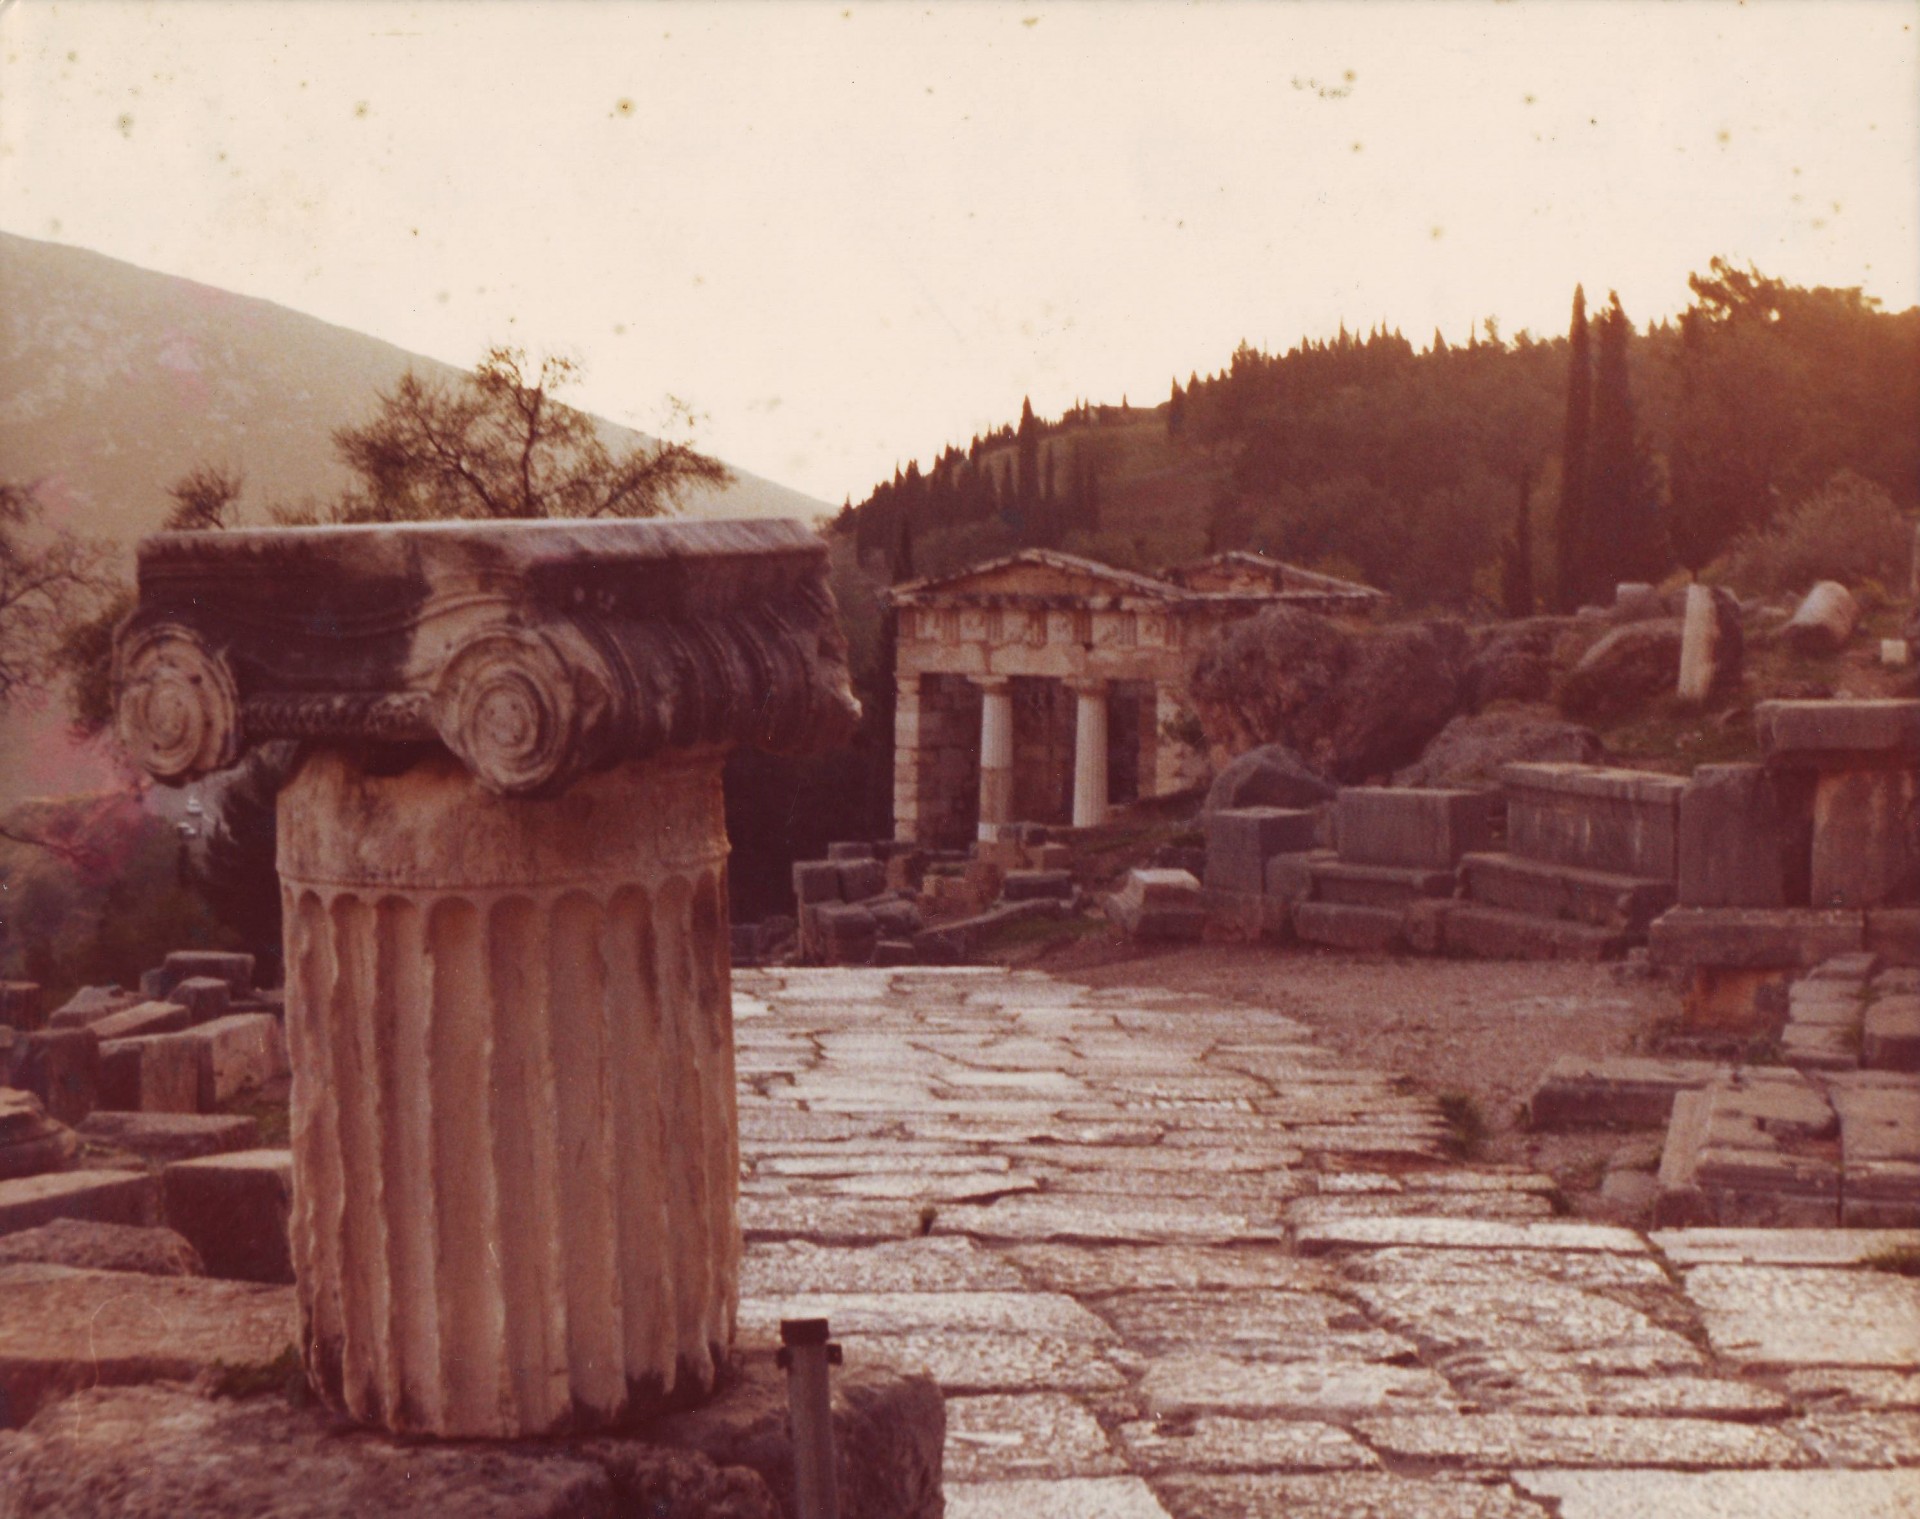 One cannot visit Delphi without taking in the Sanctuary of Apollo with its steps leading into the Sacred Way that gradually winds up to the foundation of the Temple of Apollo